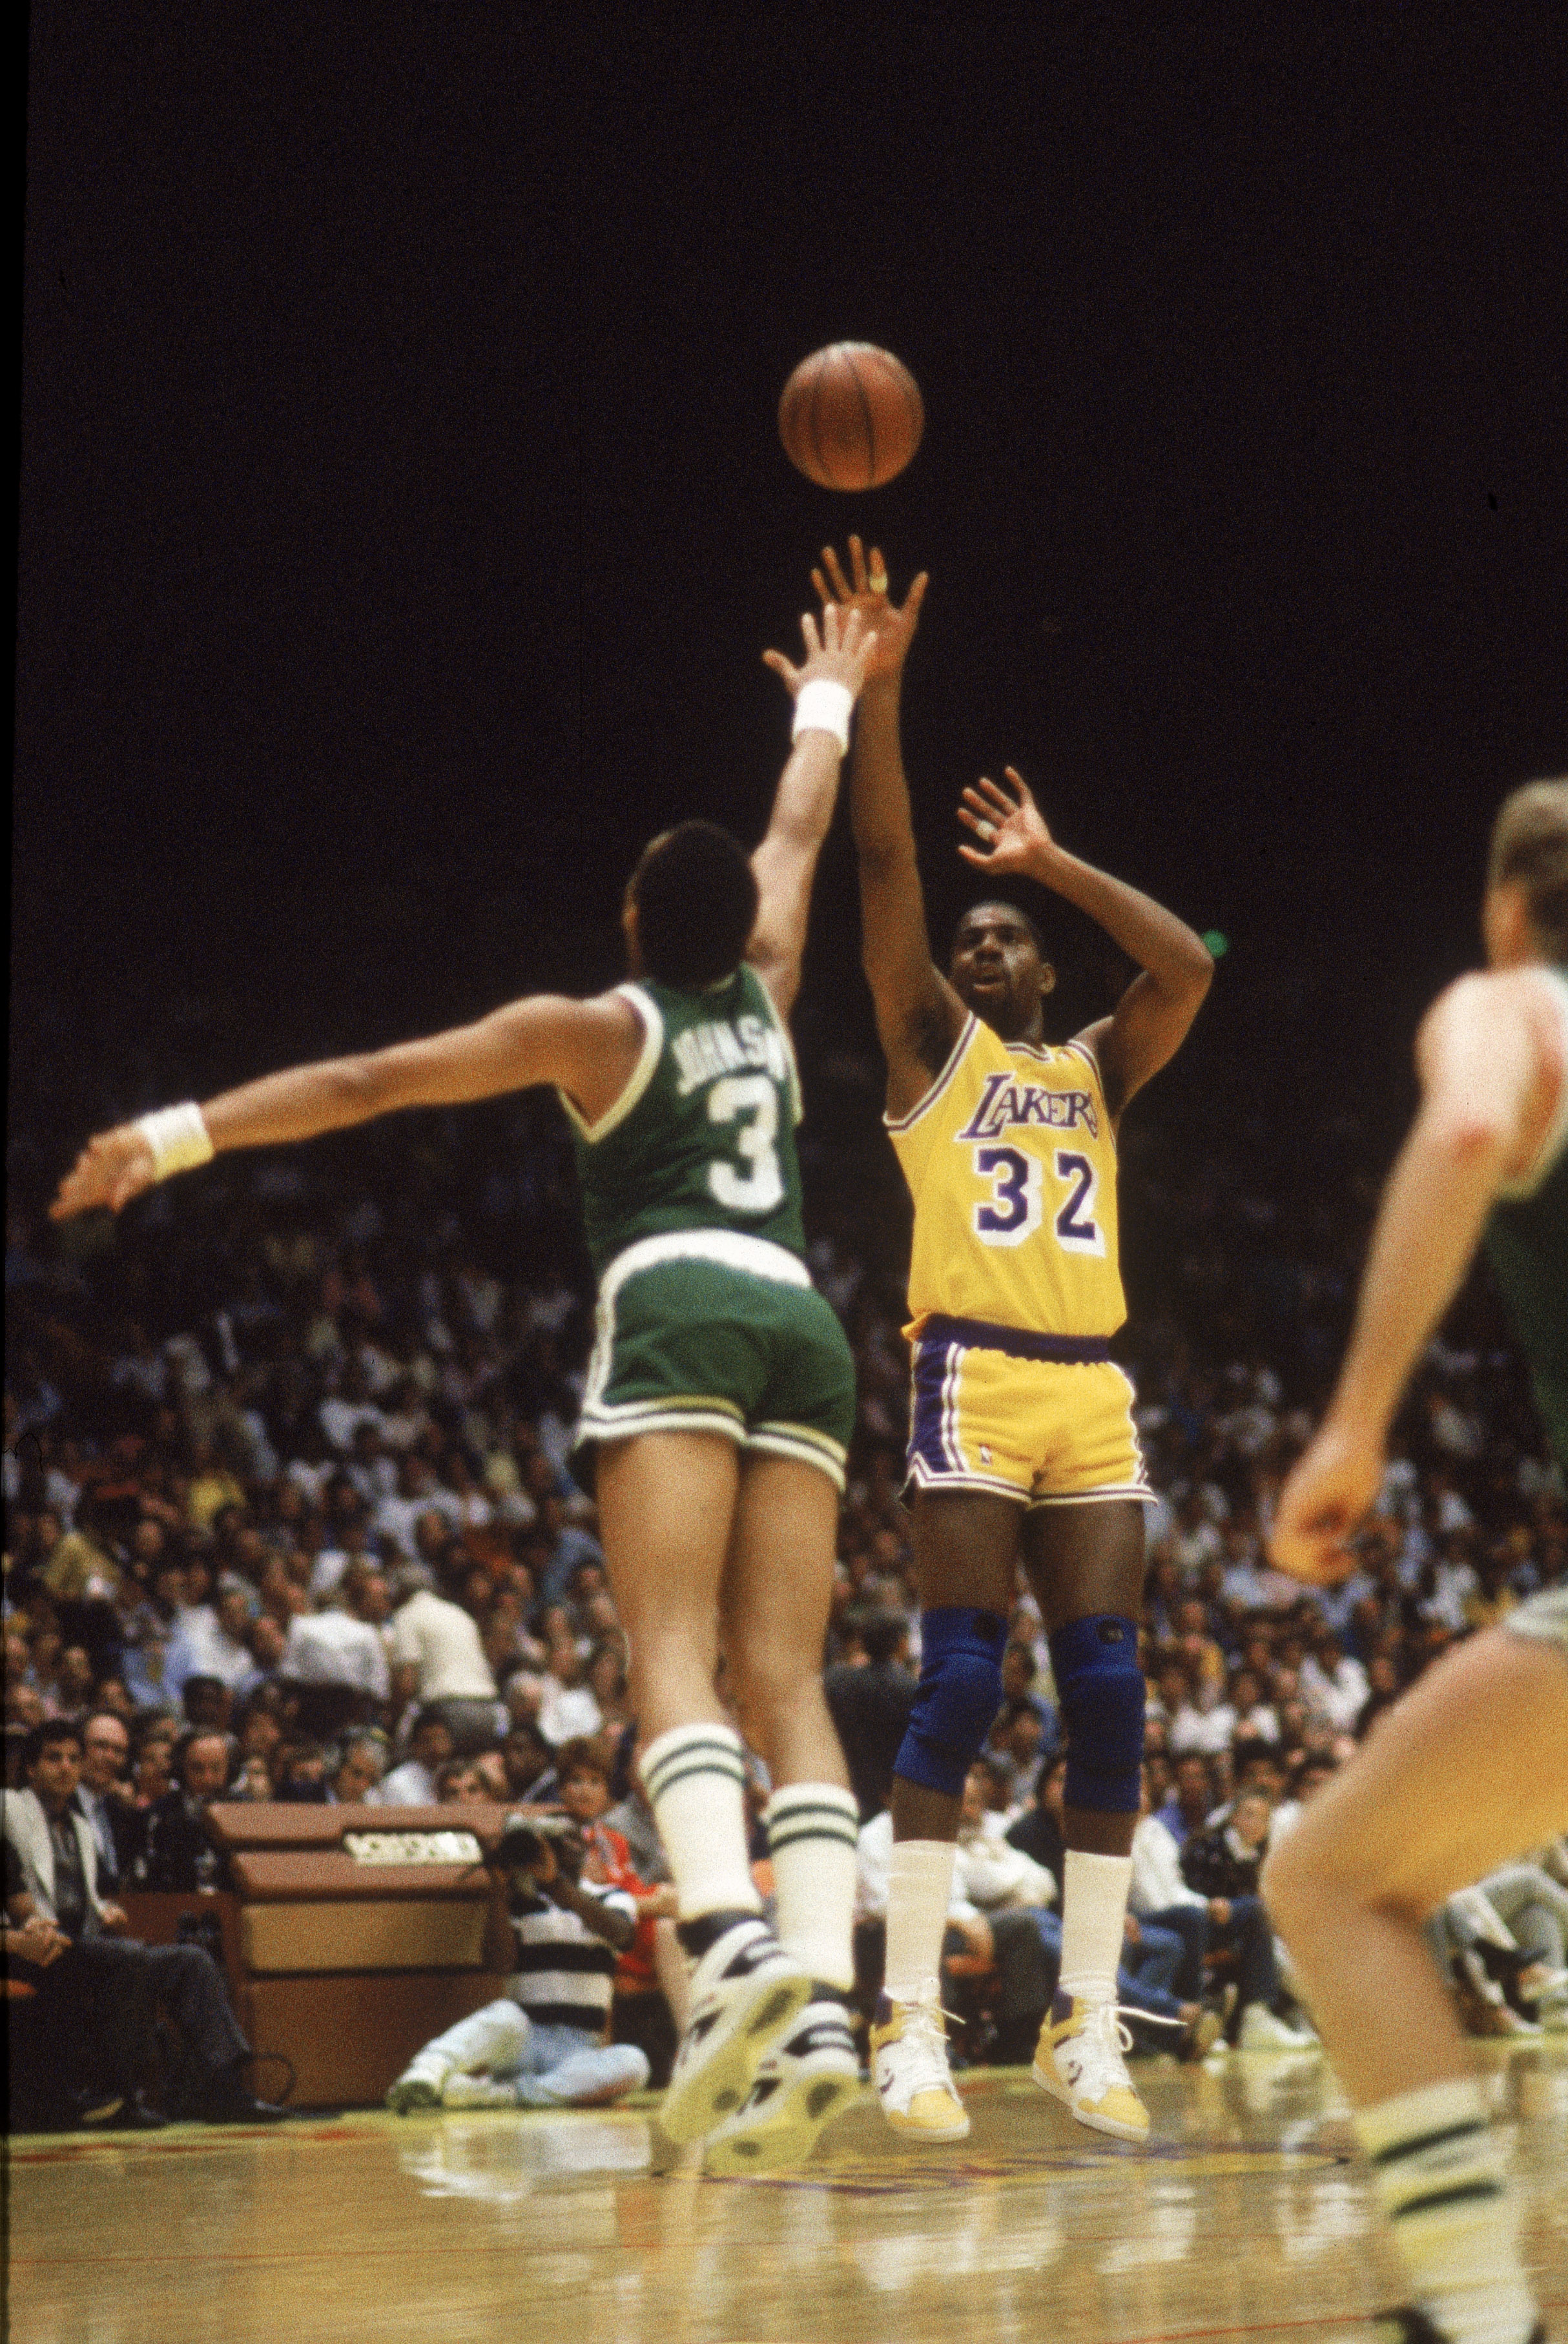 LOS ANGELES - 1987:  Magic Johnson #32 of the Los Angeles Lakers shoots over Dennis Johnson #3 of the Boston Celtics during an NBA Finals game at the Great Western Forum in Los Angeles, California in 1987. (Photo by: Mike Powell/Getty Images)